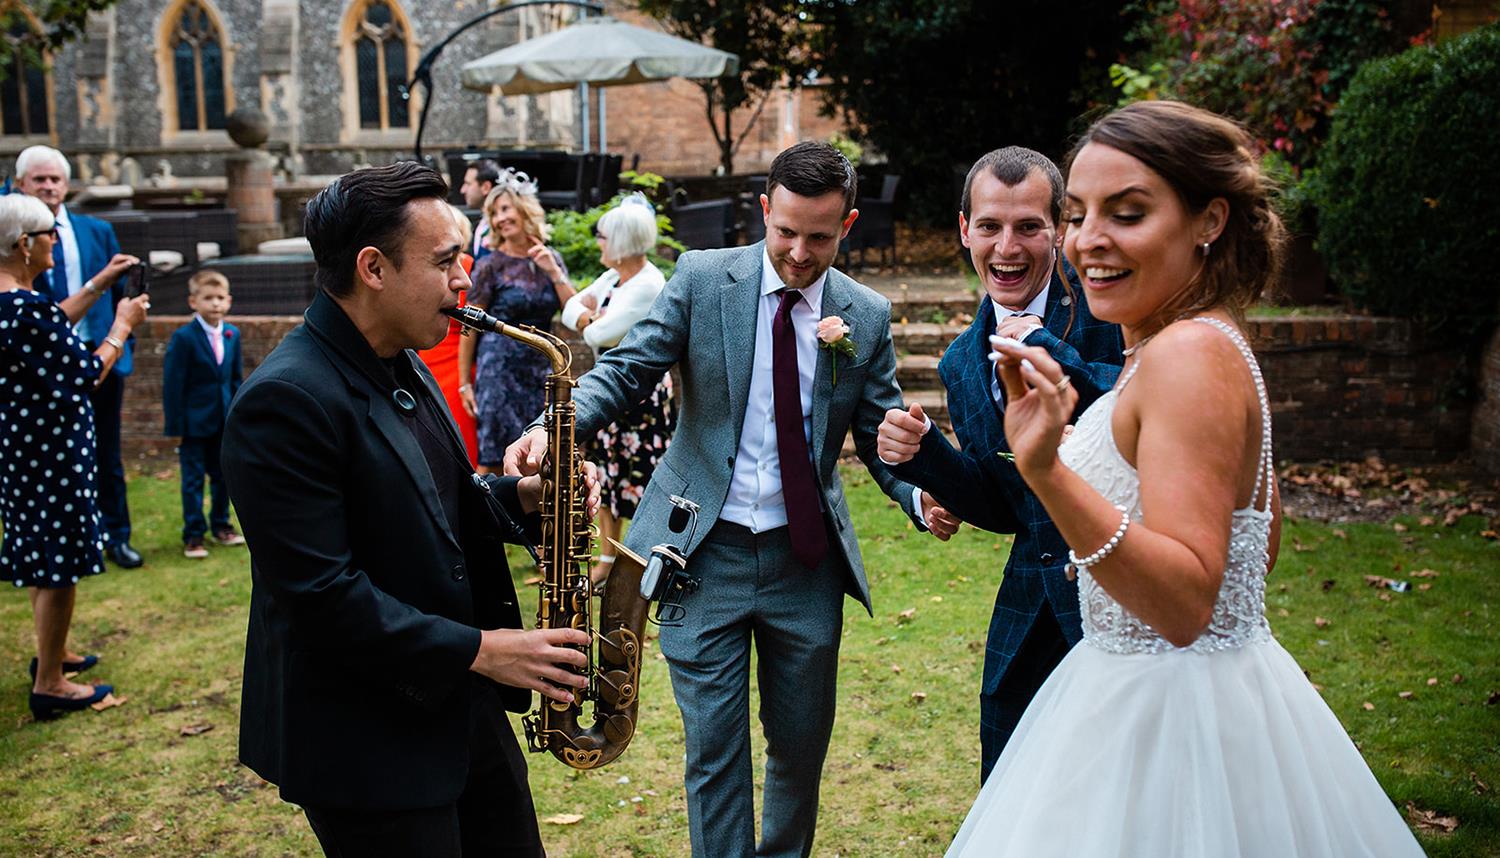 Music in the garden with saxophone. Photo Credit: Philip Quinnell